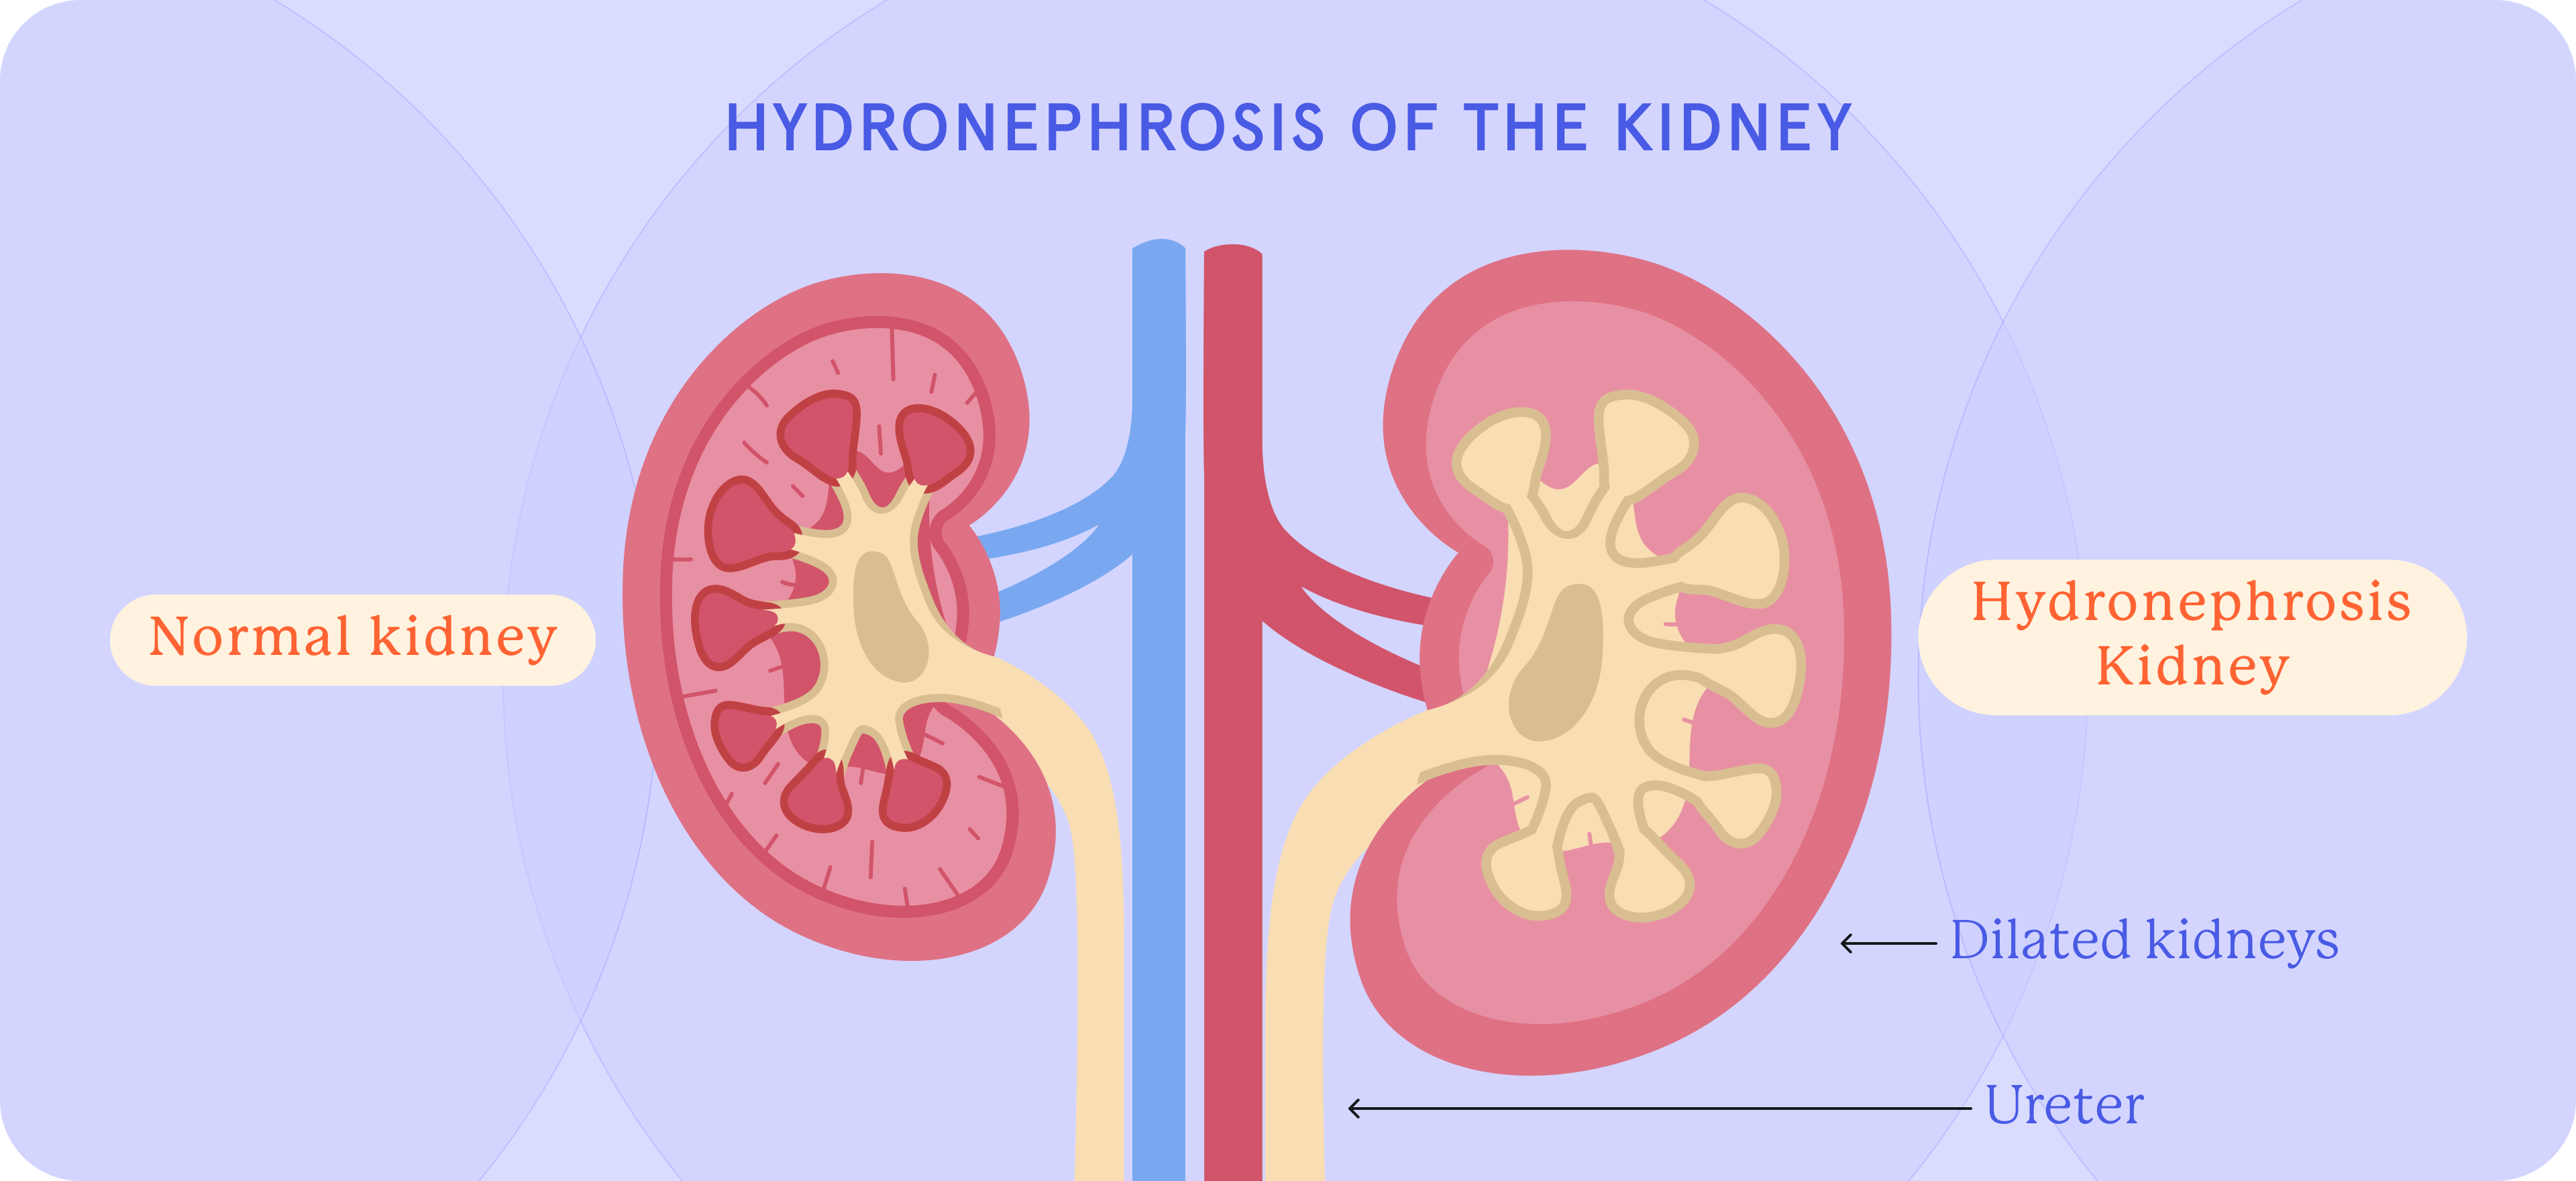 A graphic representation of hydronephrosis of the kidney